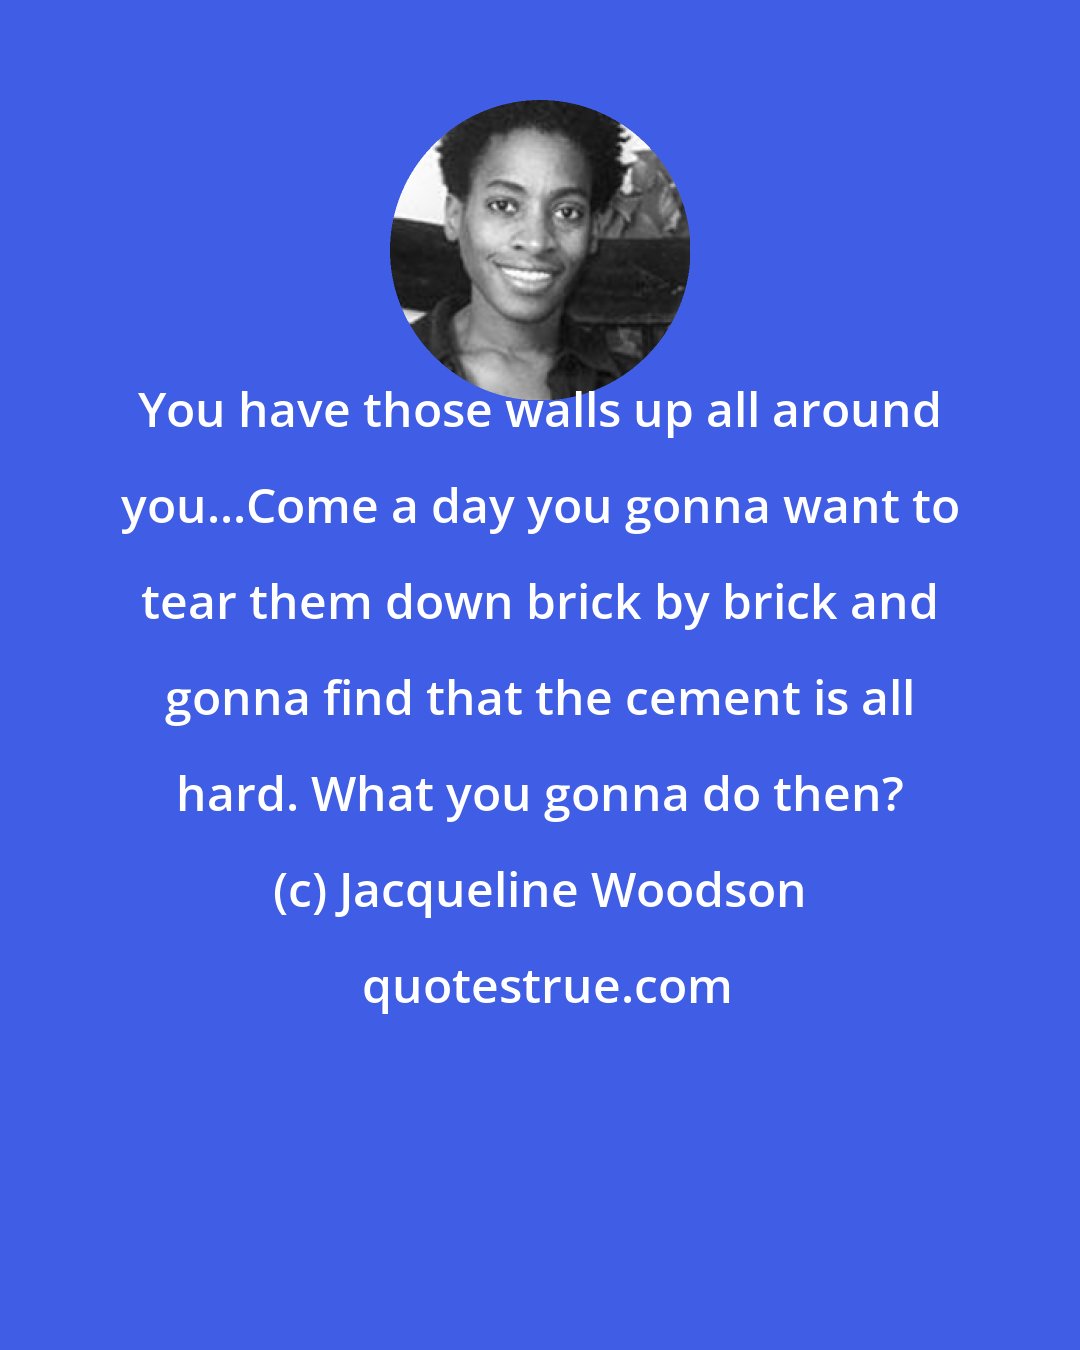 Jacqueline Woodson: You have those walls up all around you...Come a day you gonna want to tear them down brick by brick and gonna find that the cement is all hard. What you gonna do then?